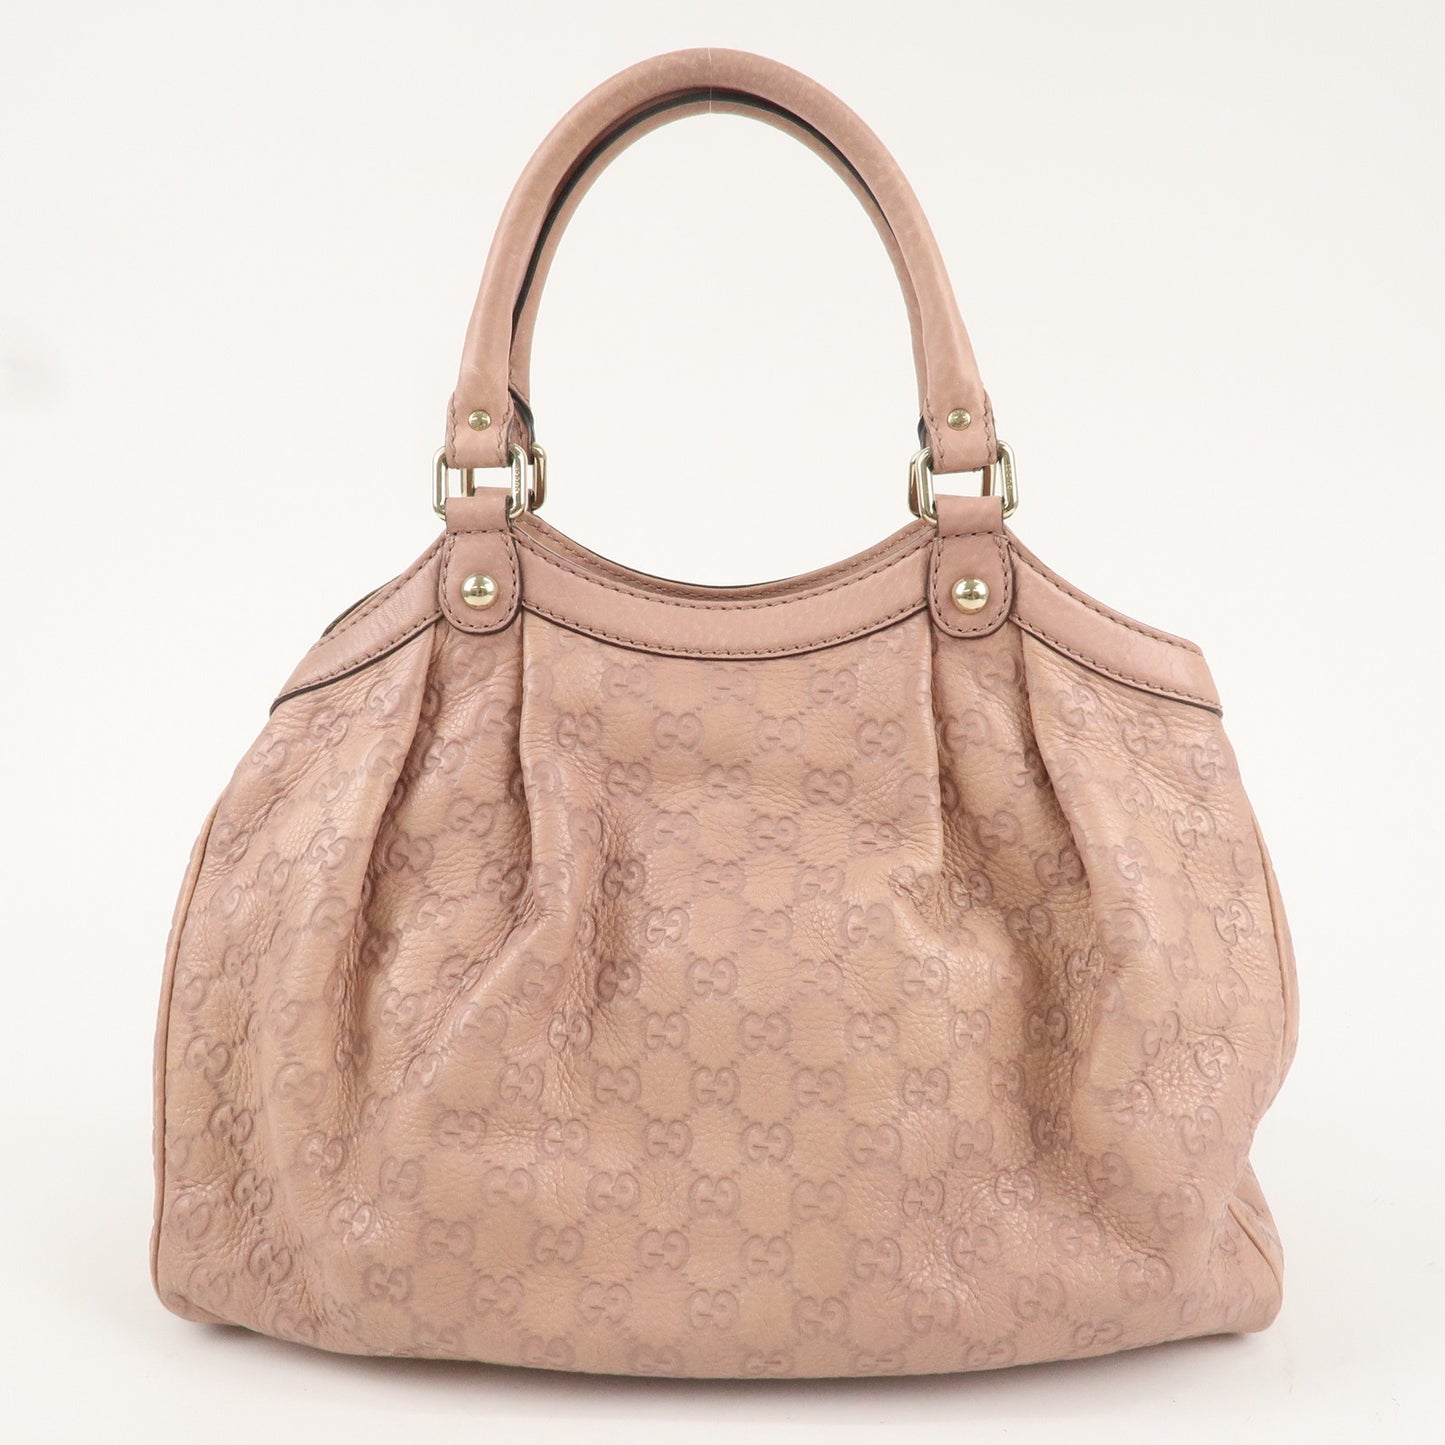 GUCCI Sukey Guccissima Leather Tote Bag Hand Bag Pink 211944